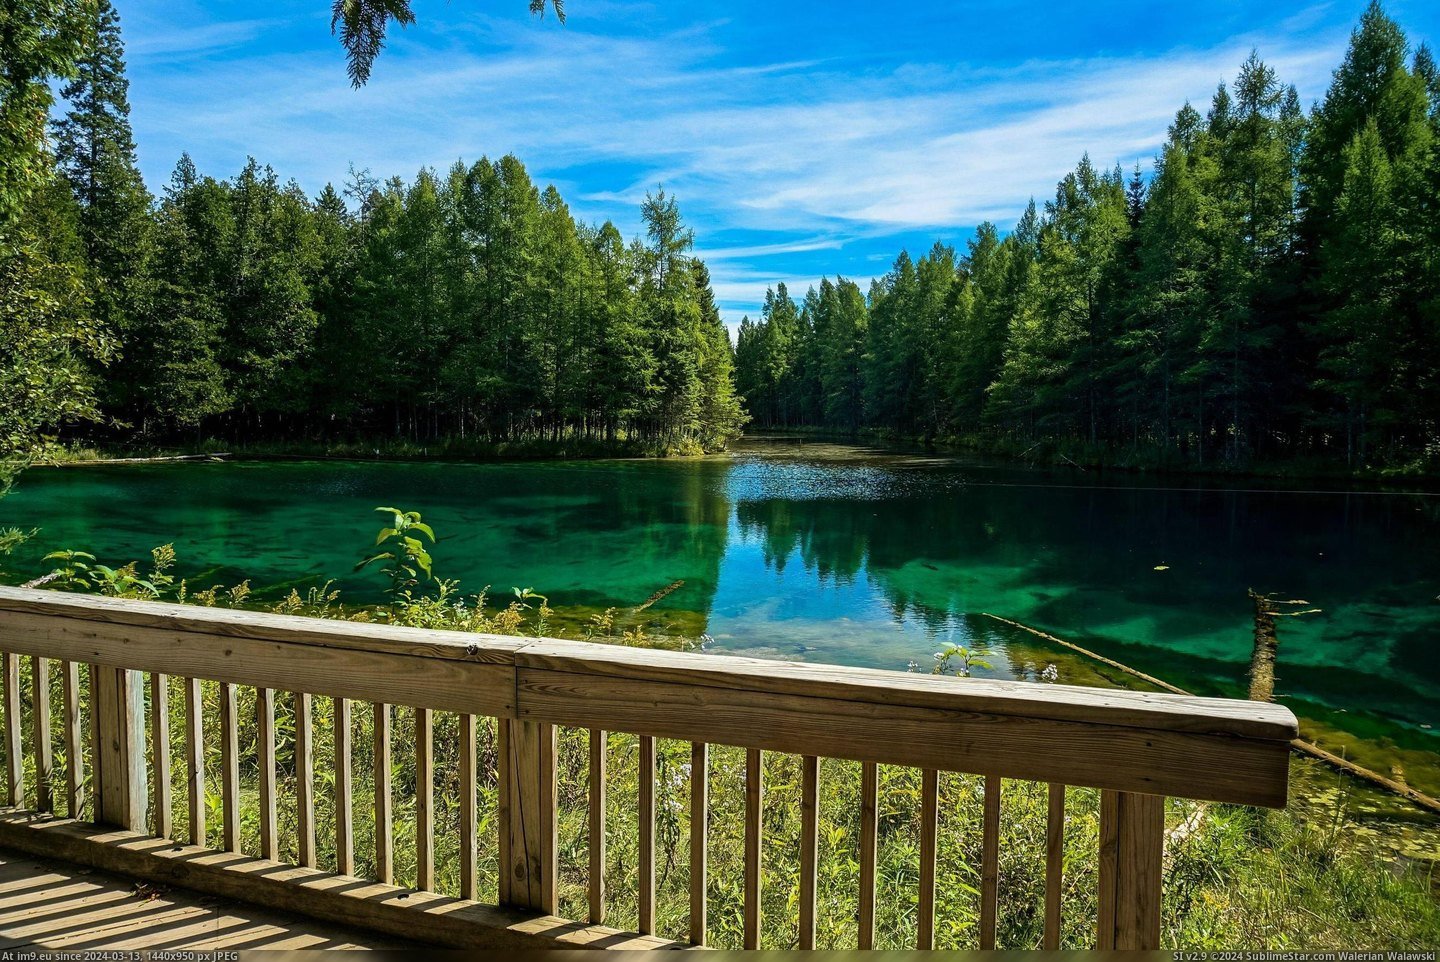 #Mirror #Natural #Early #Called #Americans #Native #Freshwater #Spring #Largest #Heaven #Michigan [Pics] Michigan's largest natural freshwater spring, early Native Americans called it the 'Mirror of Heaven.' Pic. (Изображение из альбом My r/PICS favs))